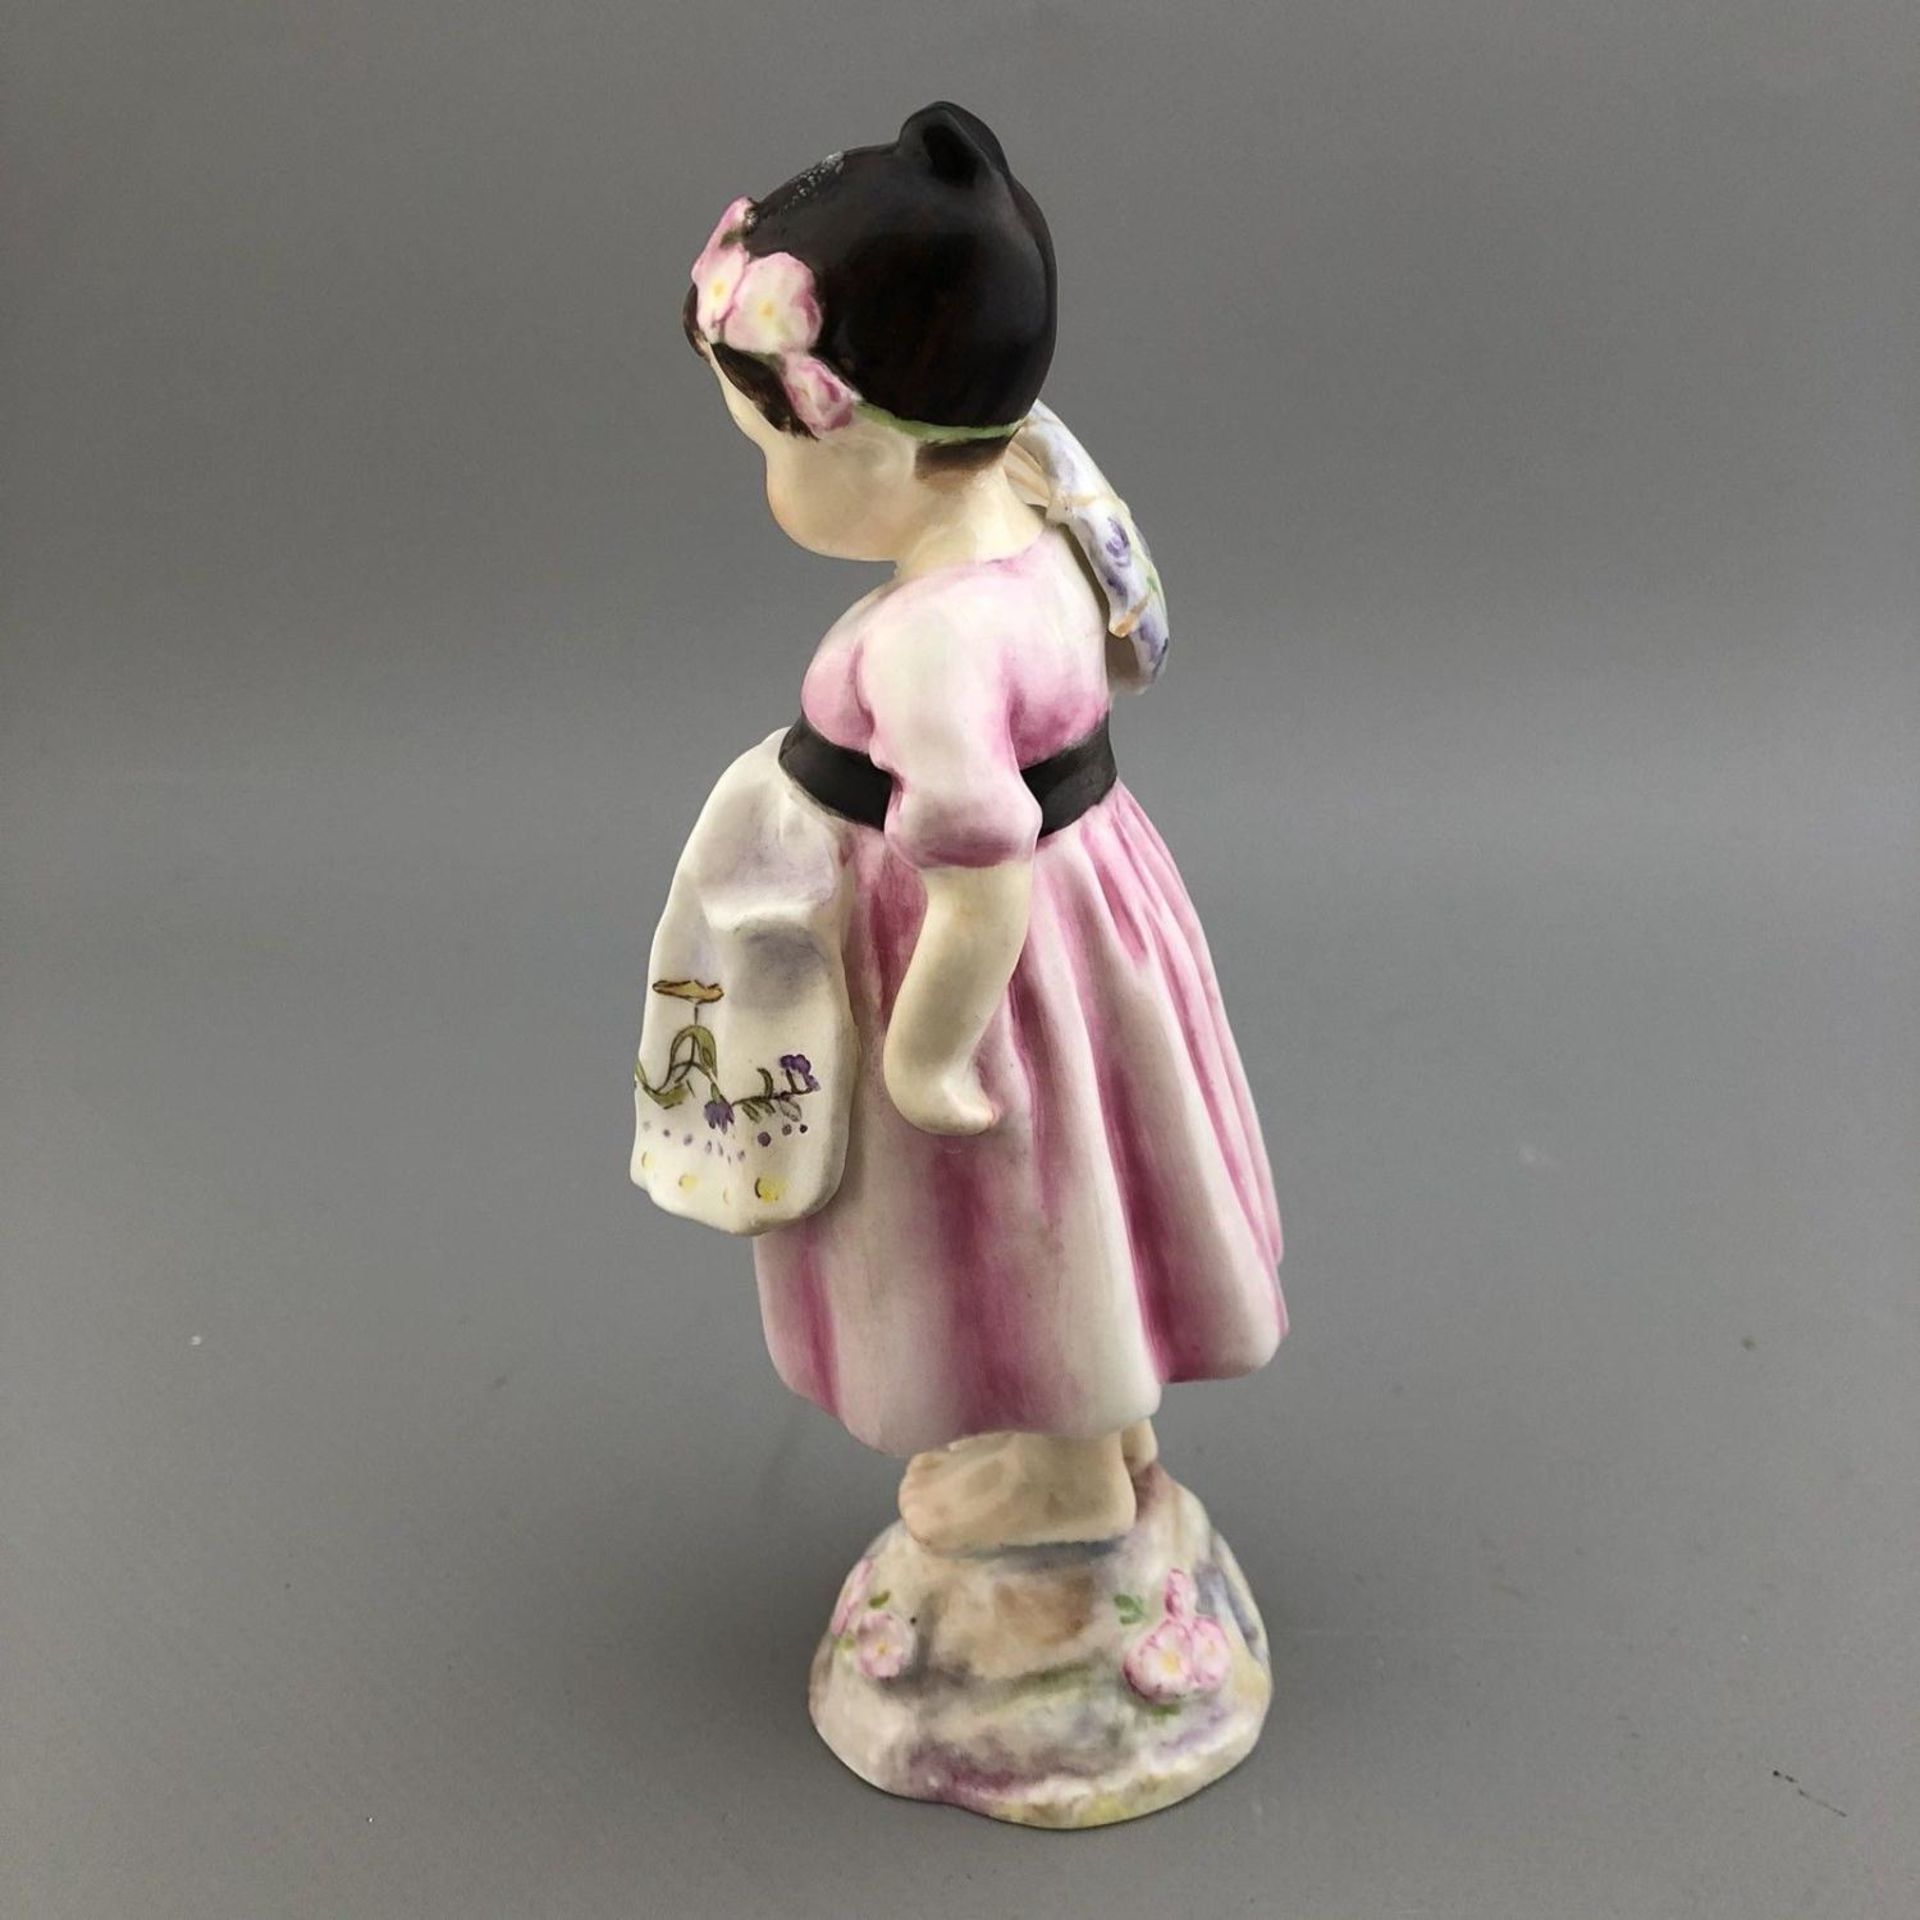 Royal Worcester Porcelain Children of the Nations Figurine SPAIN 3070 1950s - Image 4 of 6